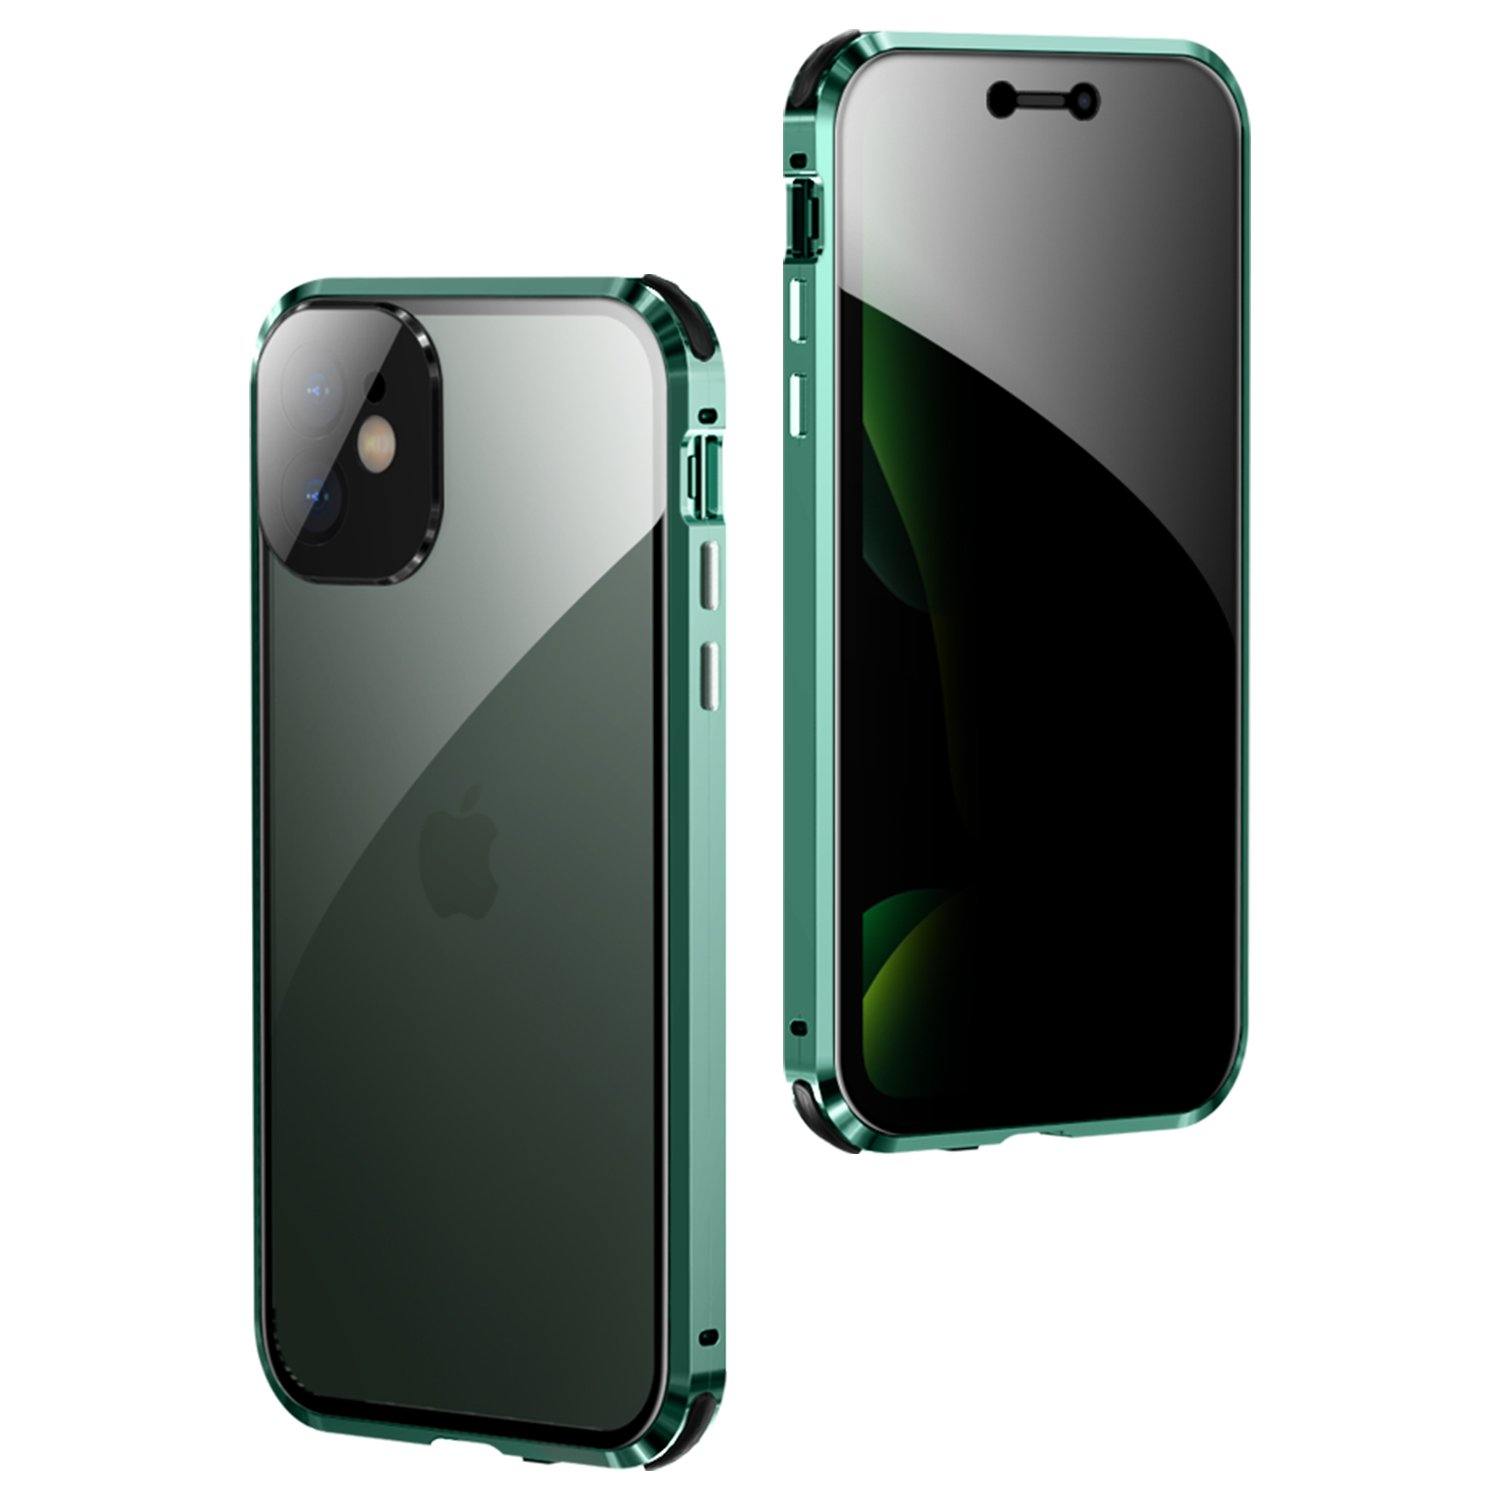 Kylin Armor Shield Magnetic Aluminum Metal Bumper Anti-Spy Privacy Front+Back Tempered Glass Case Cover - Armor King Case